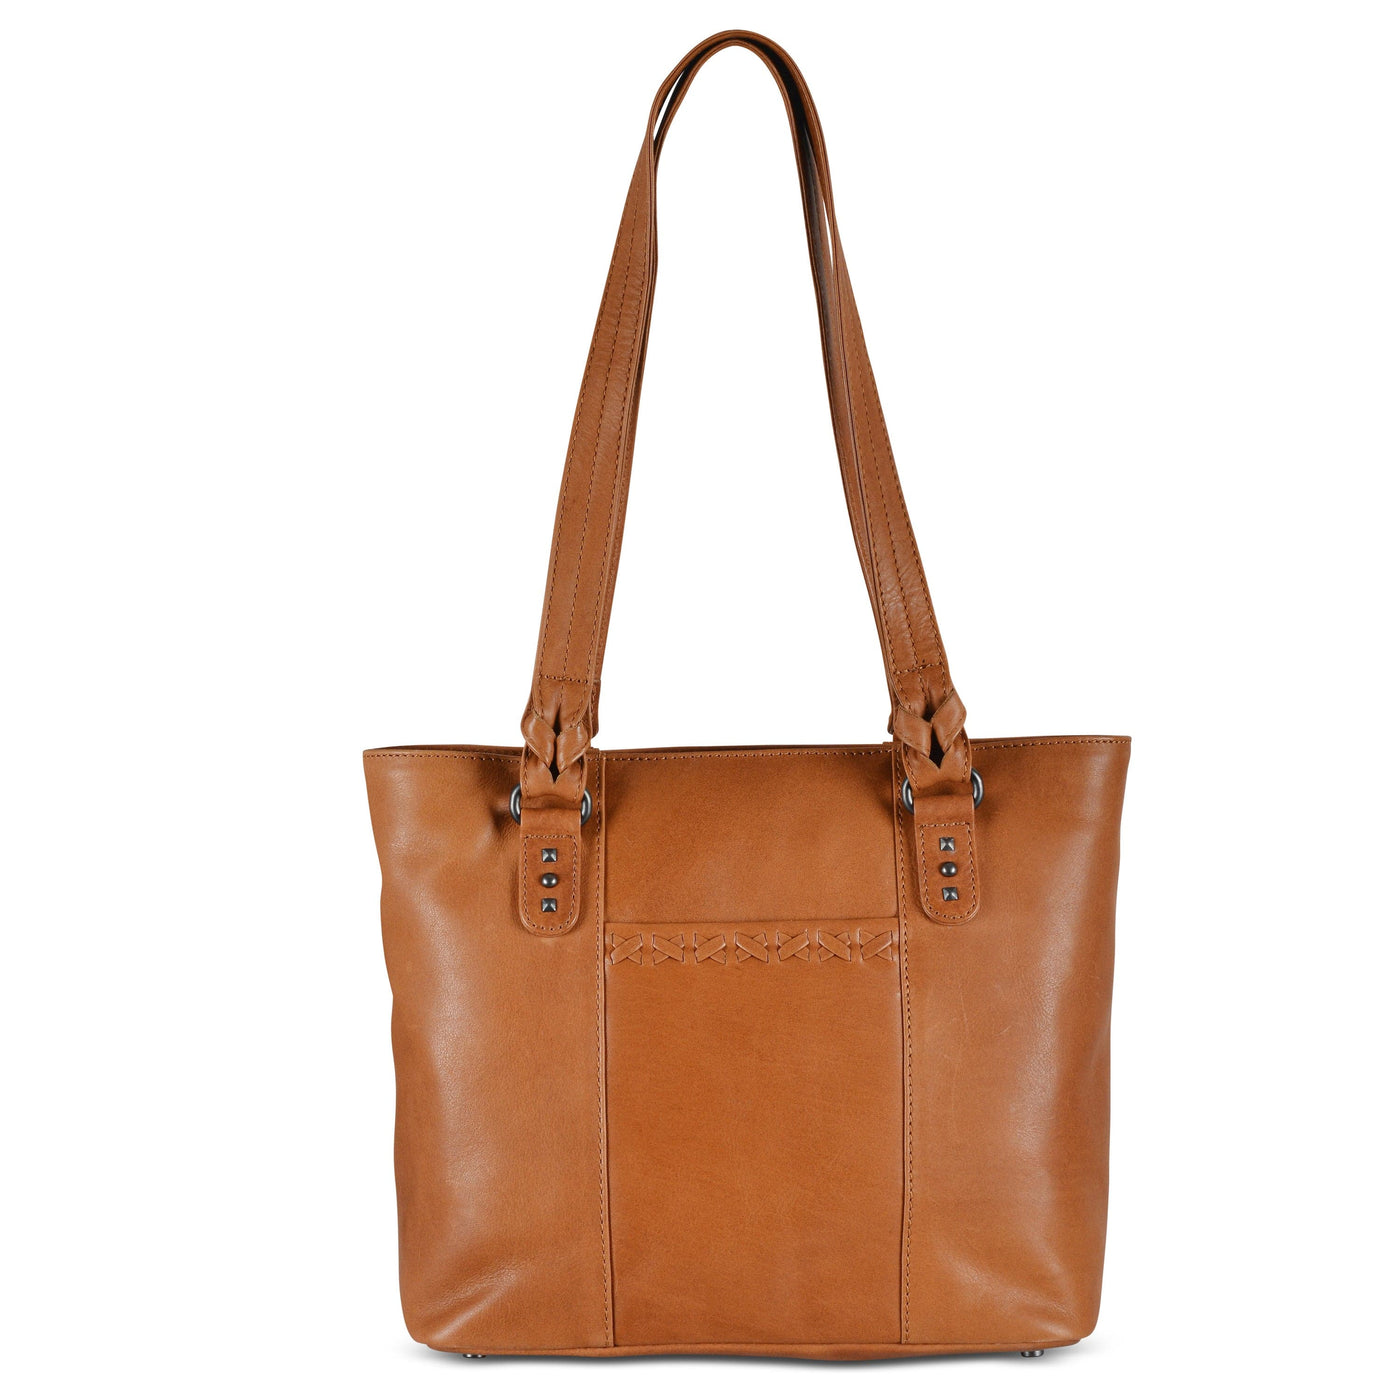 Peyton Leather Concealed Carry Tote Bag Caramel